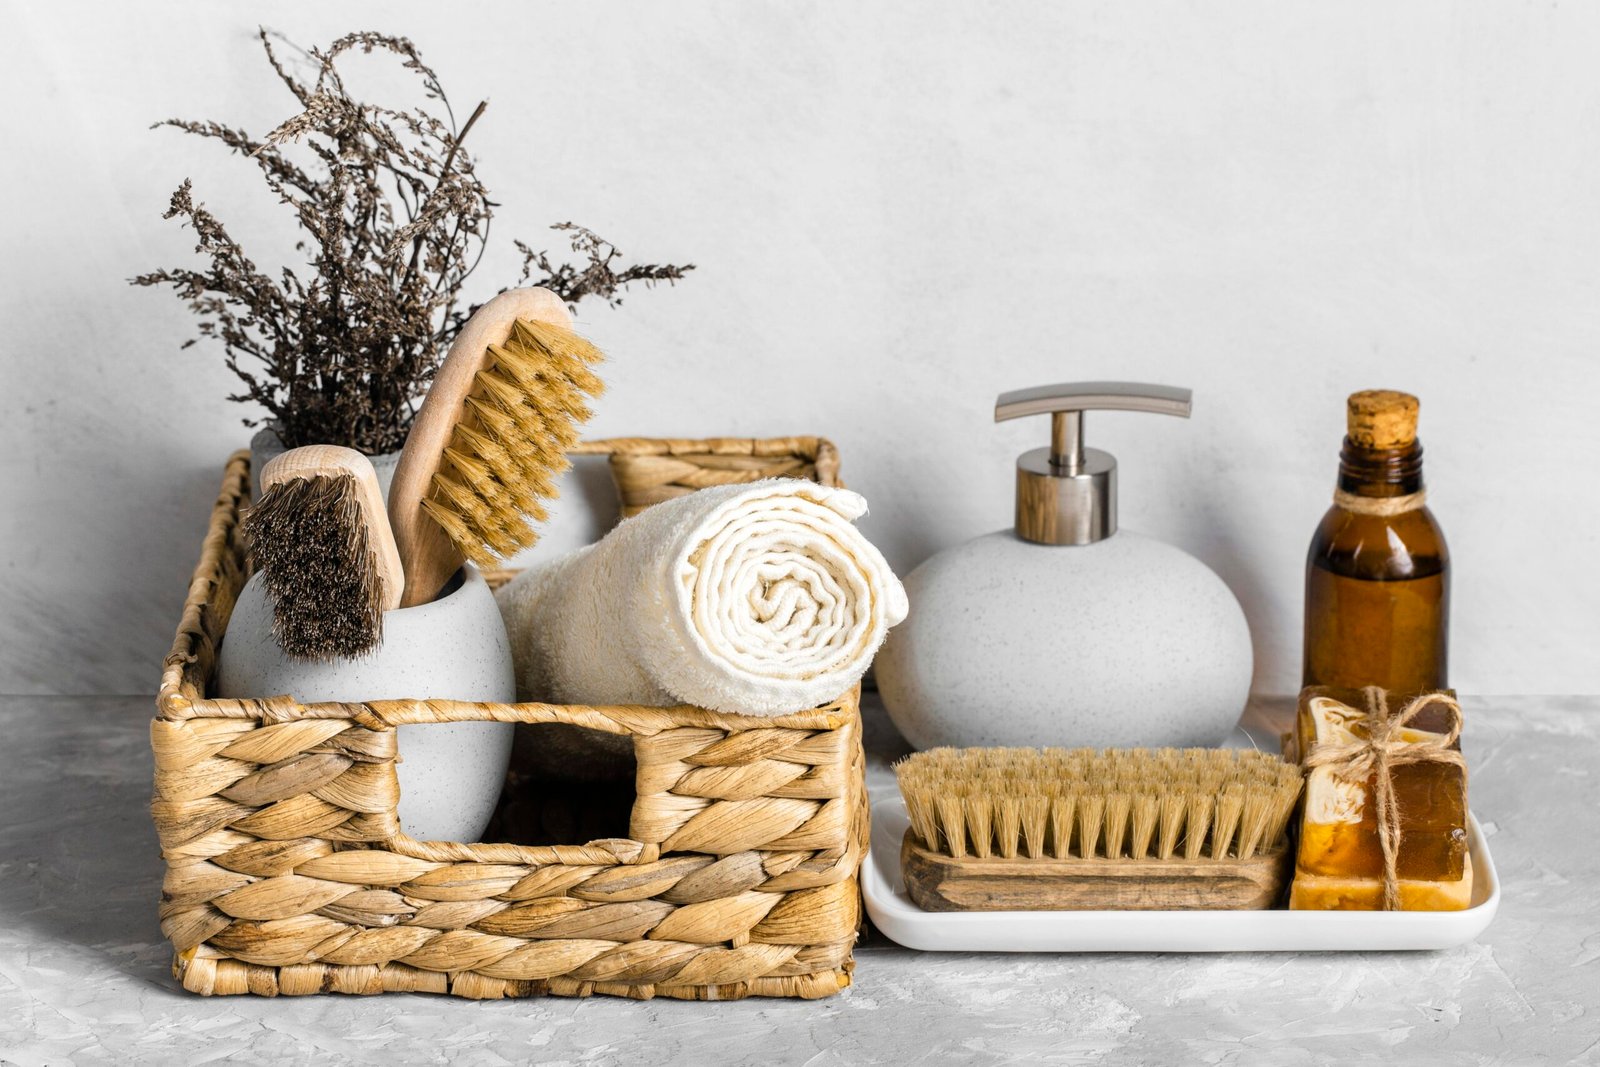 Eco-friendly cleaning products, set of baskets with soaps, brushes.